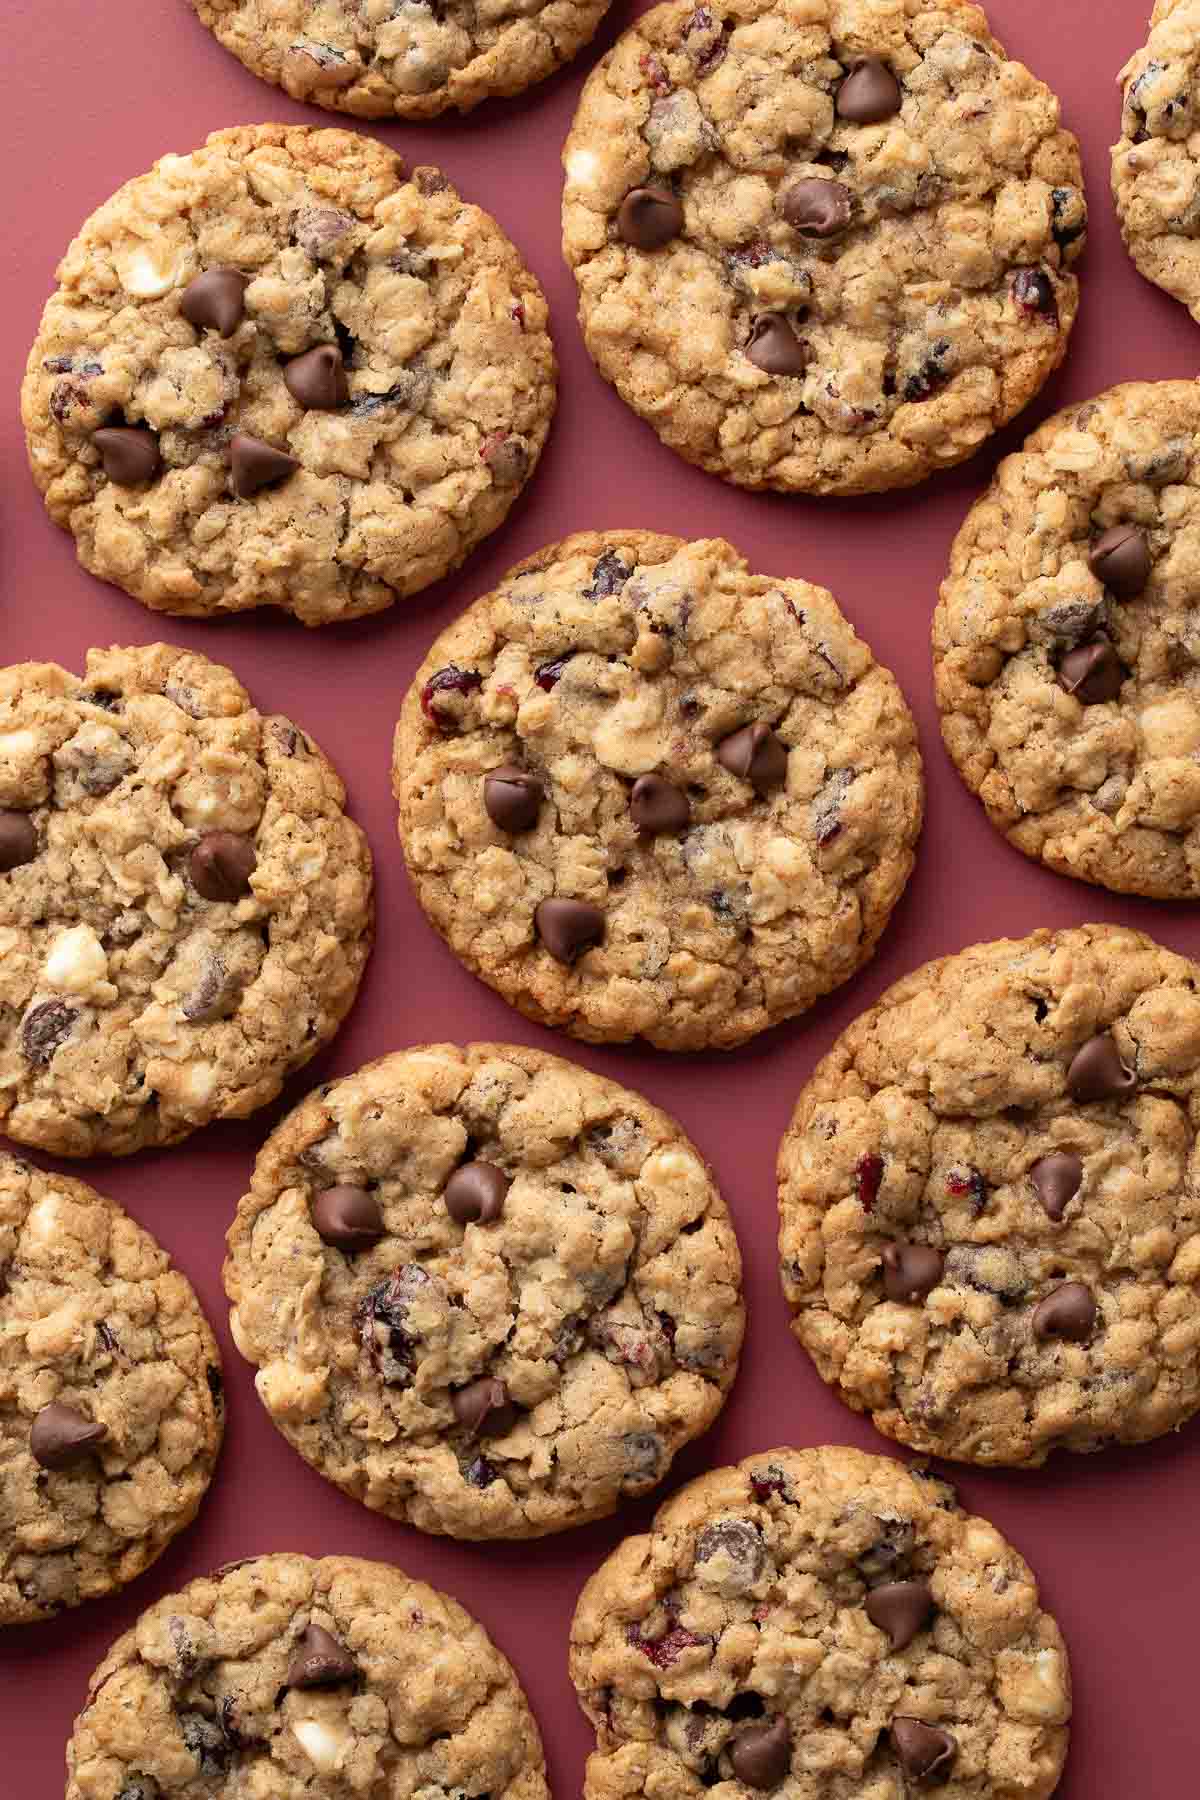 Oatmeal Cranberry Chocolate Chip Cookies